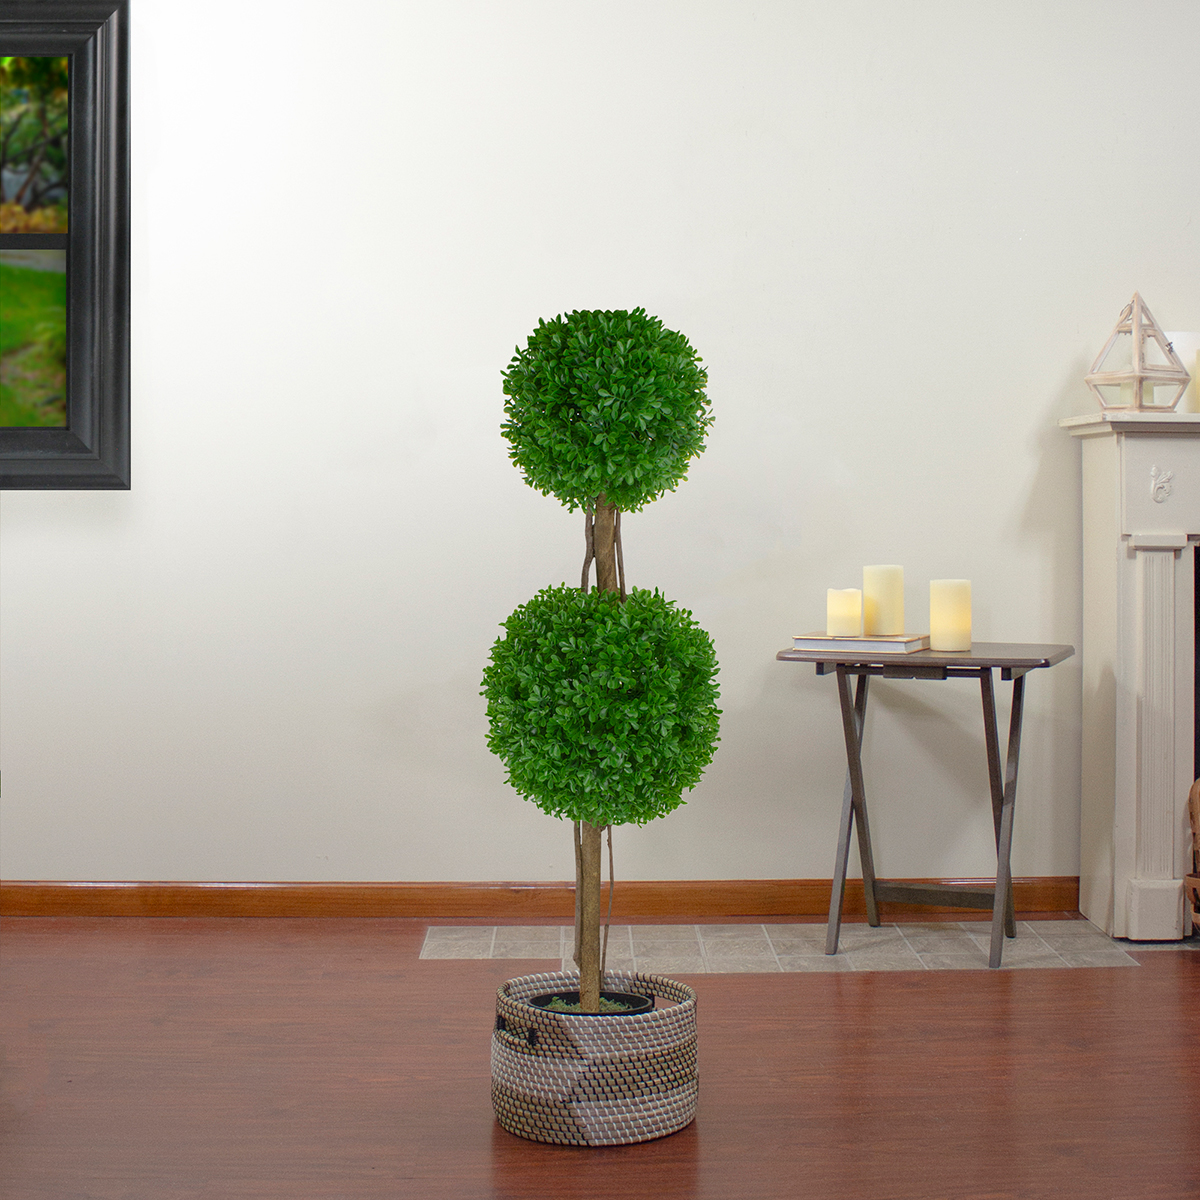 Northlight Seasonal 36in. Artificial Double Sphere Boxwood Plant